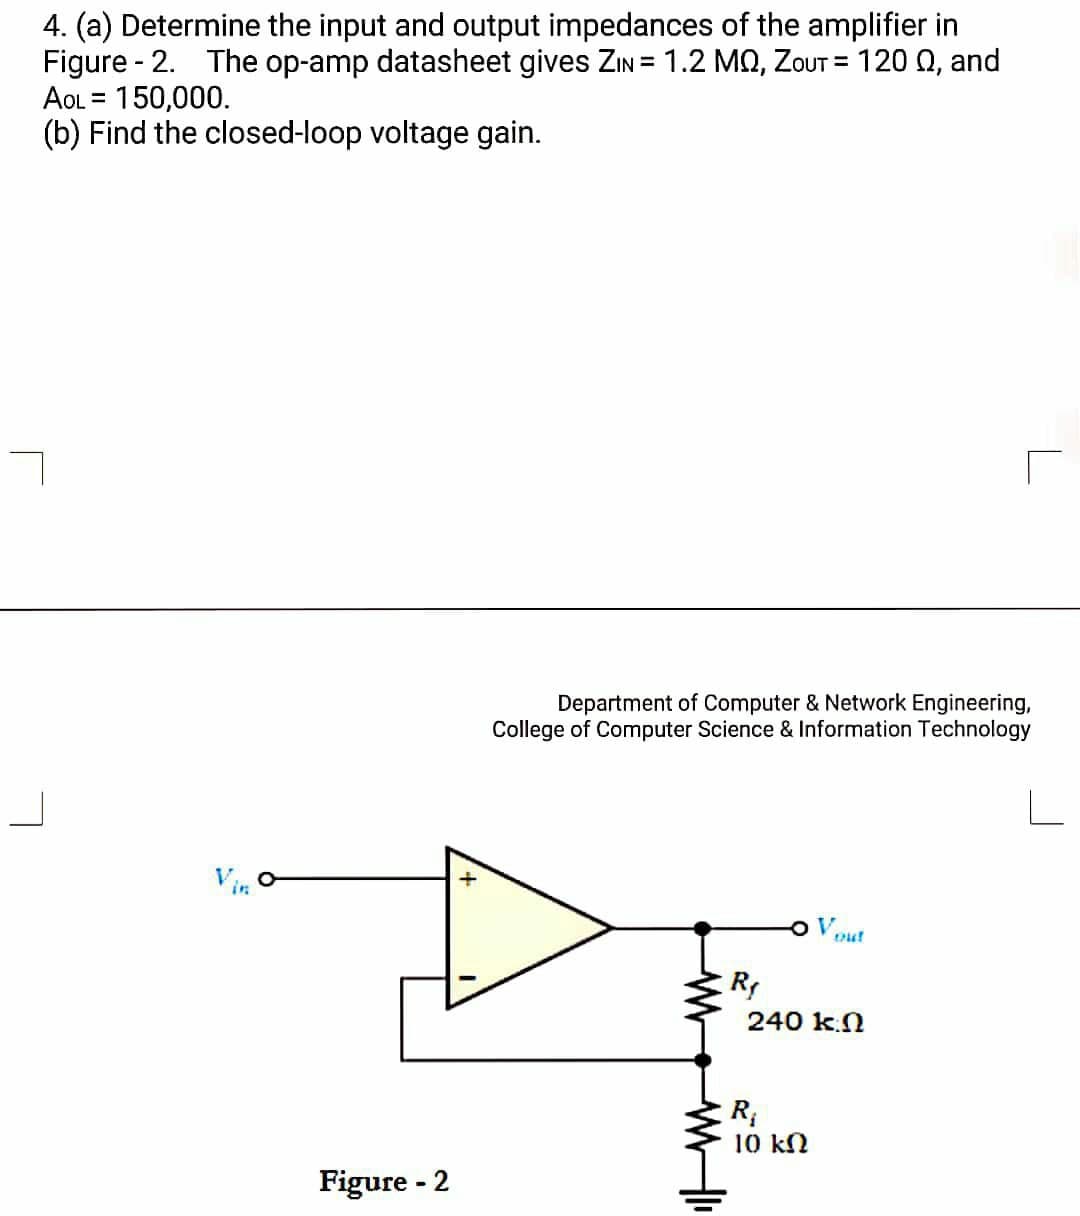 4. (a) Determine the input and output impedances of the amplifier in
Figure - 2. The op-amp datasheet gives ZIN = 1.2 MQ, ZOUT = 120 0, and
AOL = 150,000.
(b) Find the closed-loop voltage gain.
%3D
Department of Computer & Network Engineering,
College of Computer Science & Information Technology
Vin
Vout
R
240 k.N
10 kN
Figure - 2
